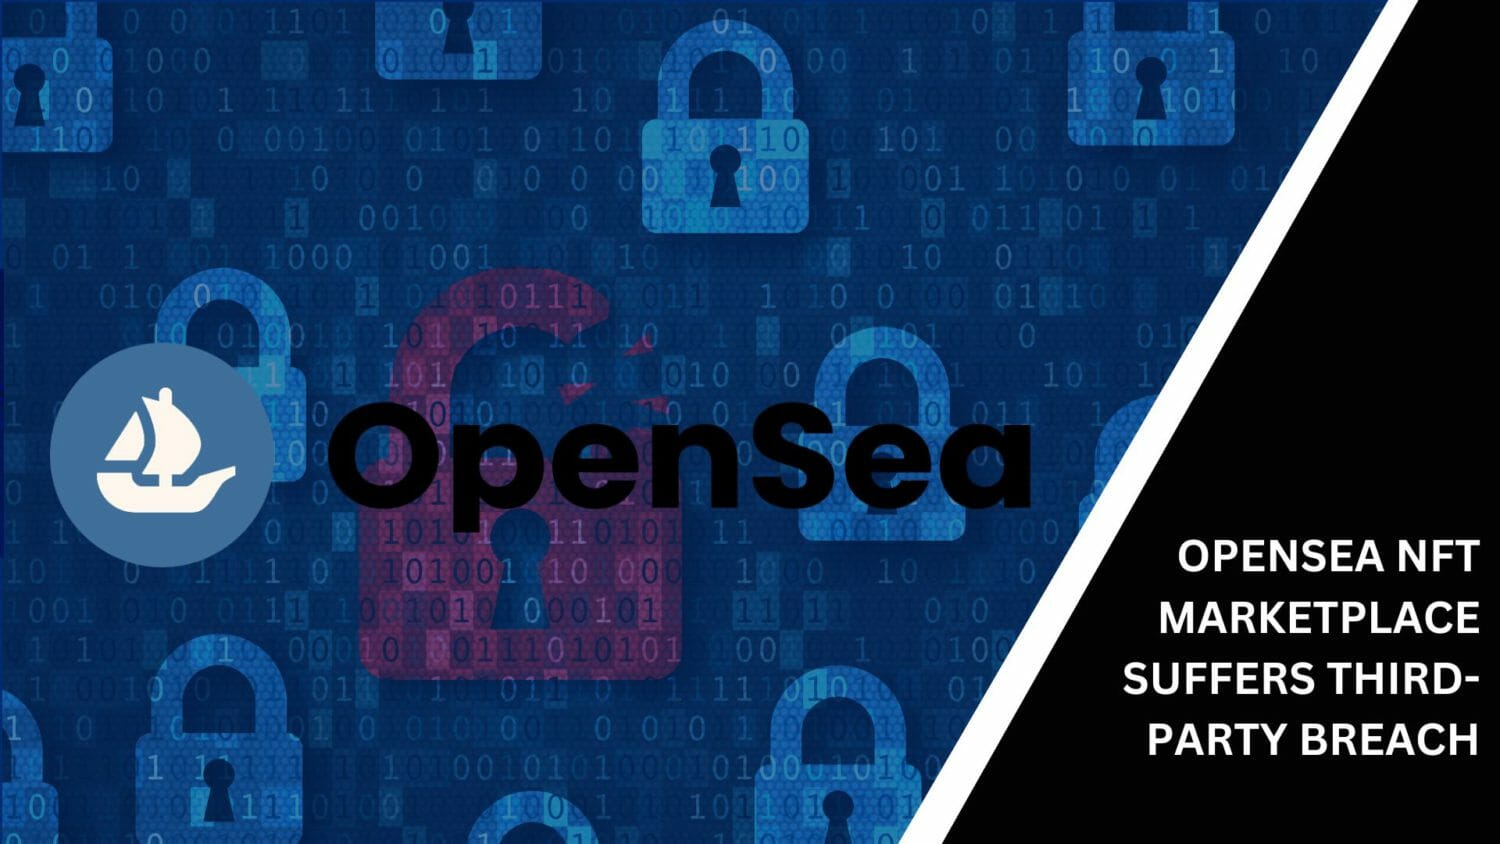 Opensea Nft Marketplace Suffers Third-Party Breach